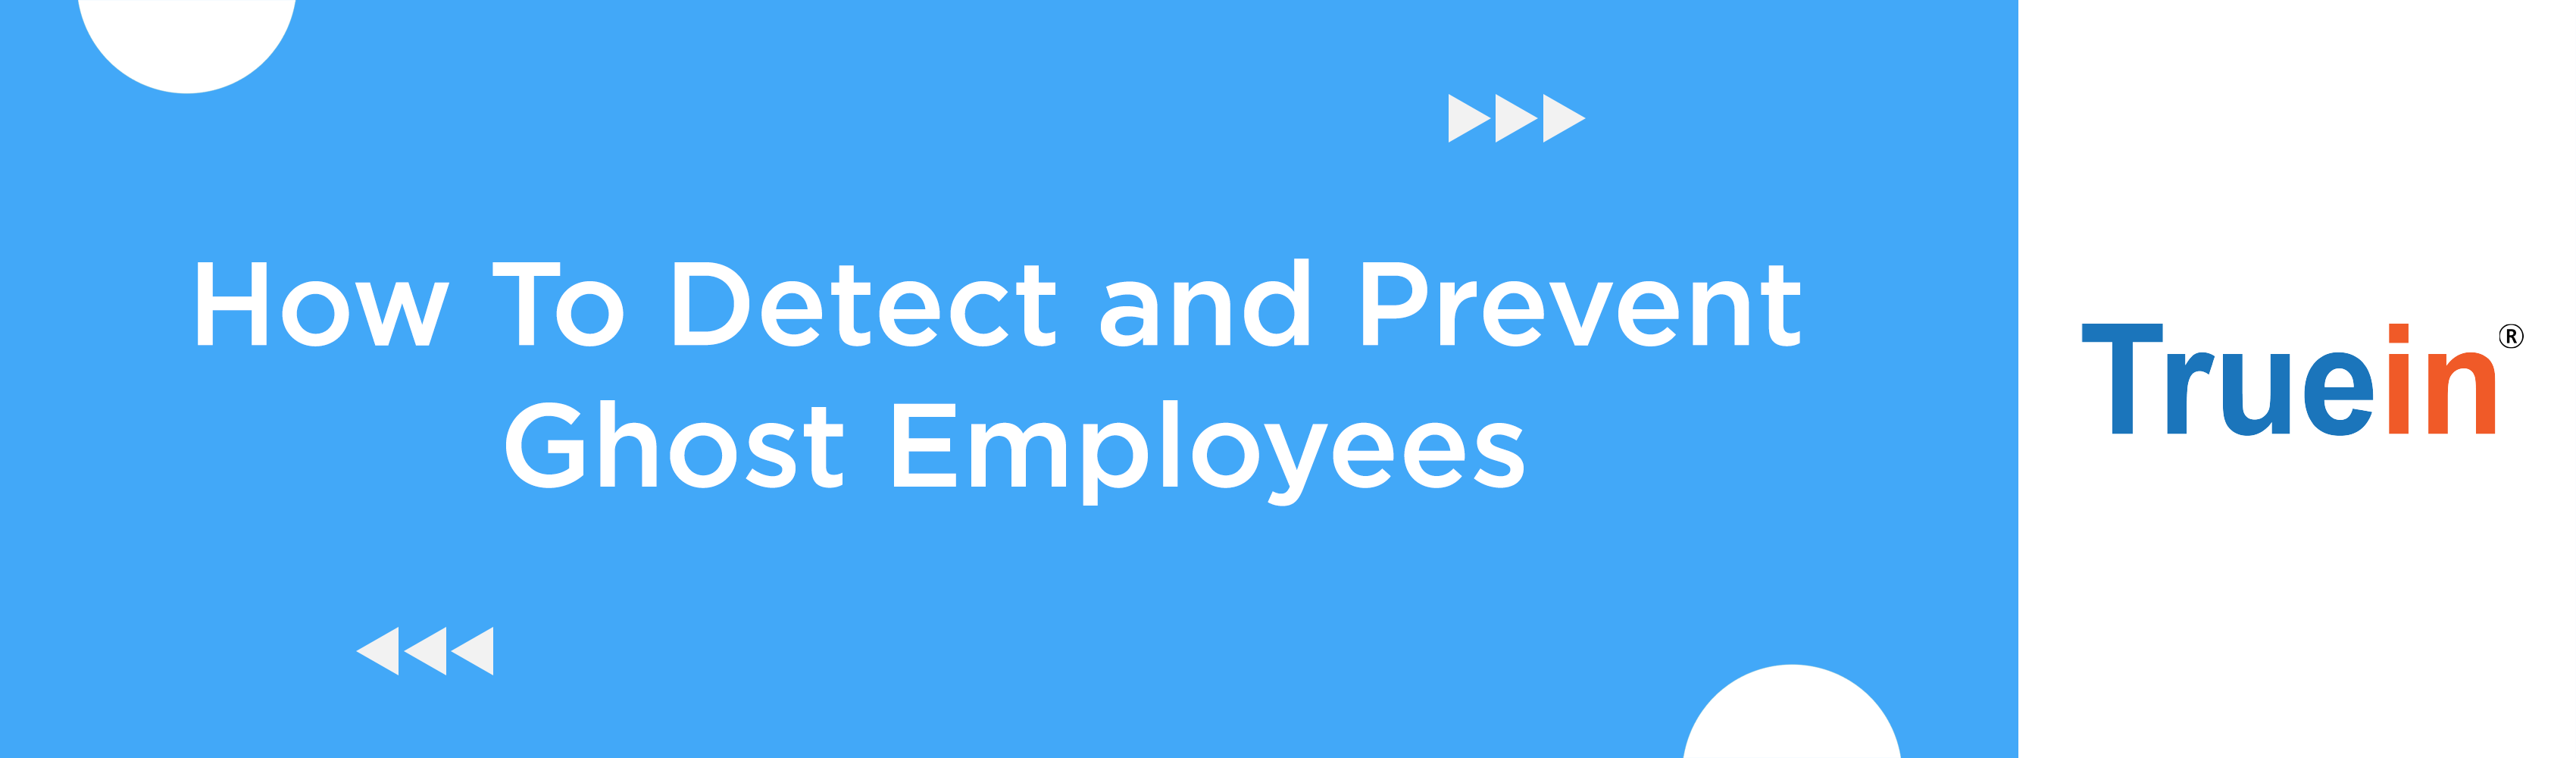 Ghost Employees: How To Prevent and Detect It?